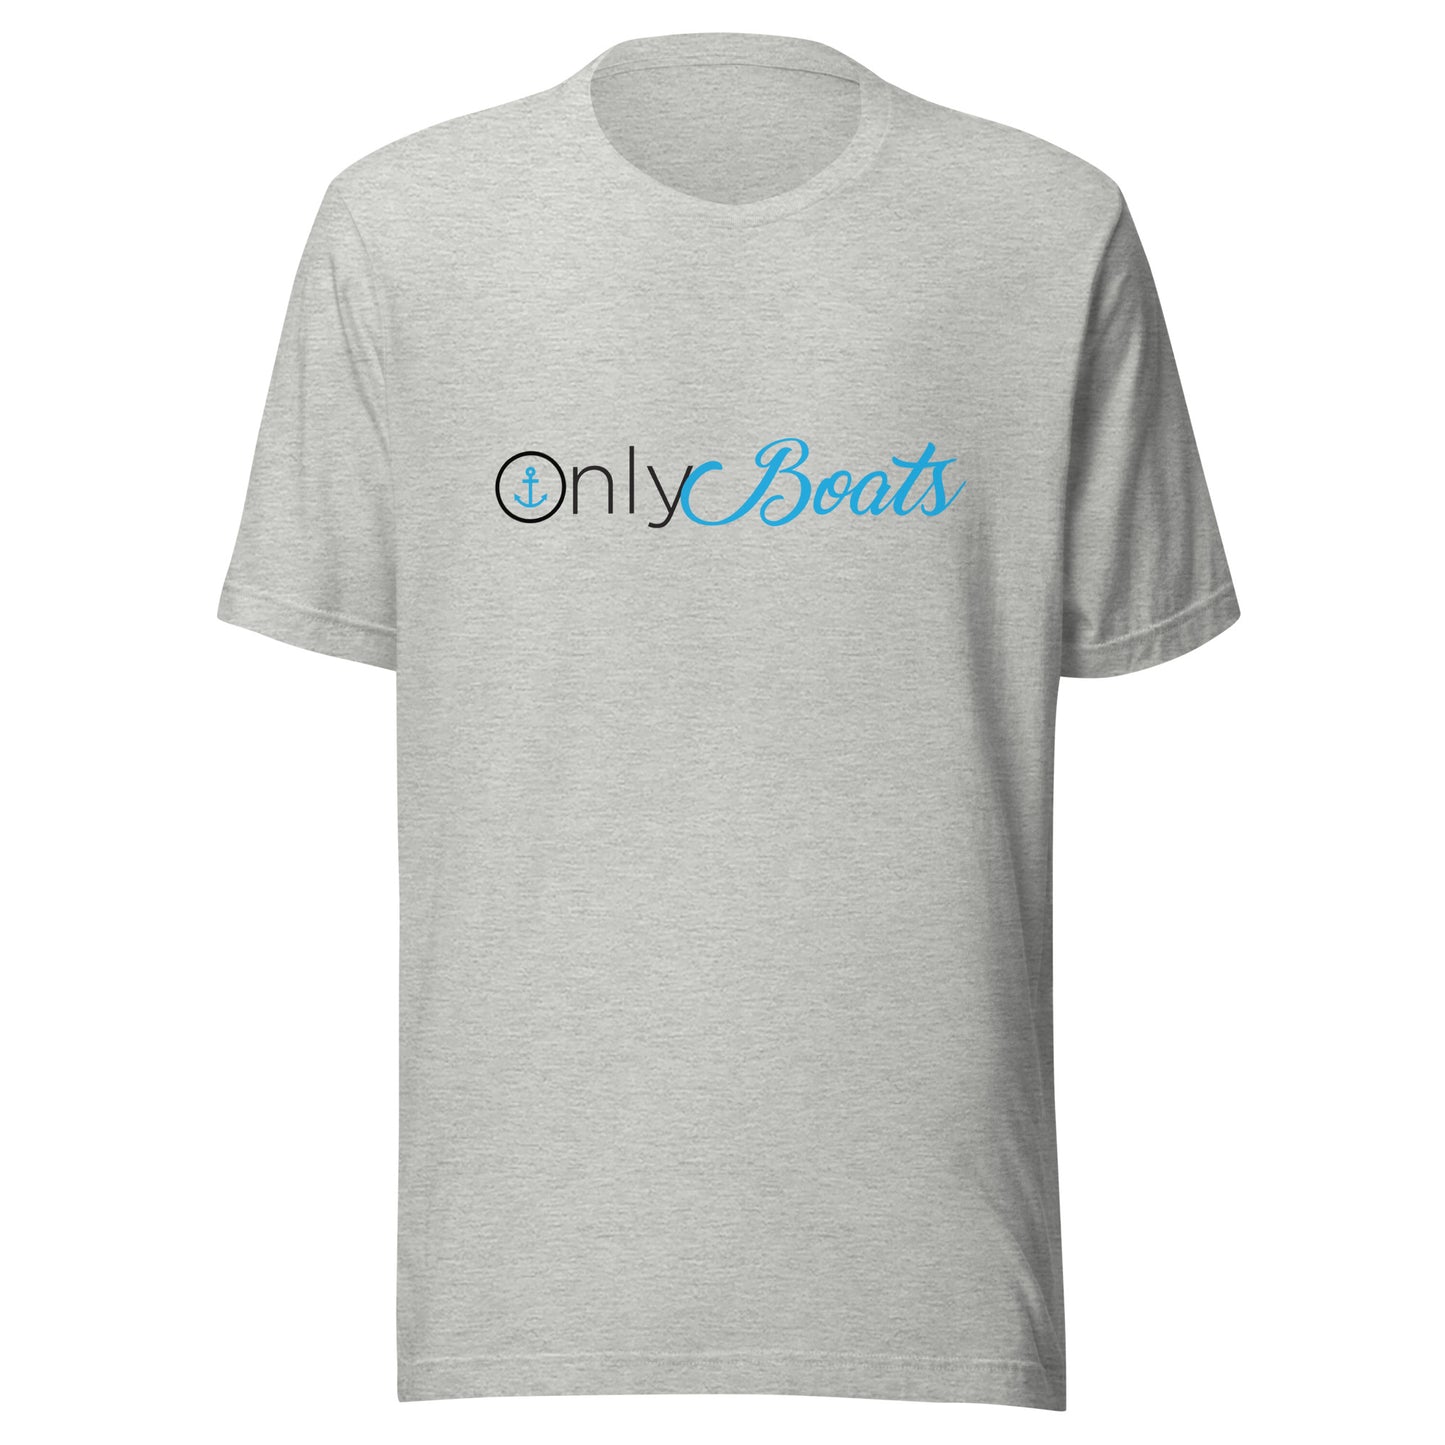 Fans t-shirt - ONLY BOATS